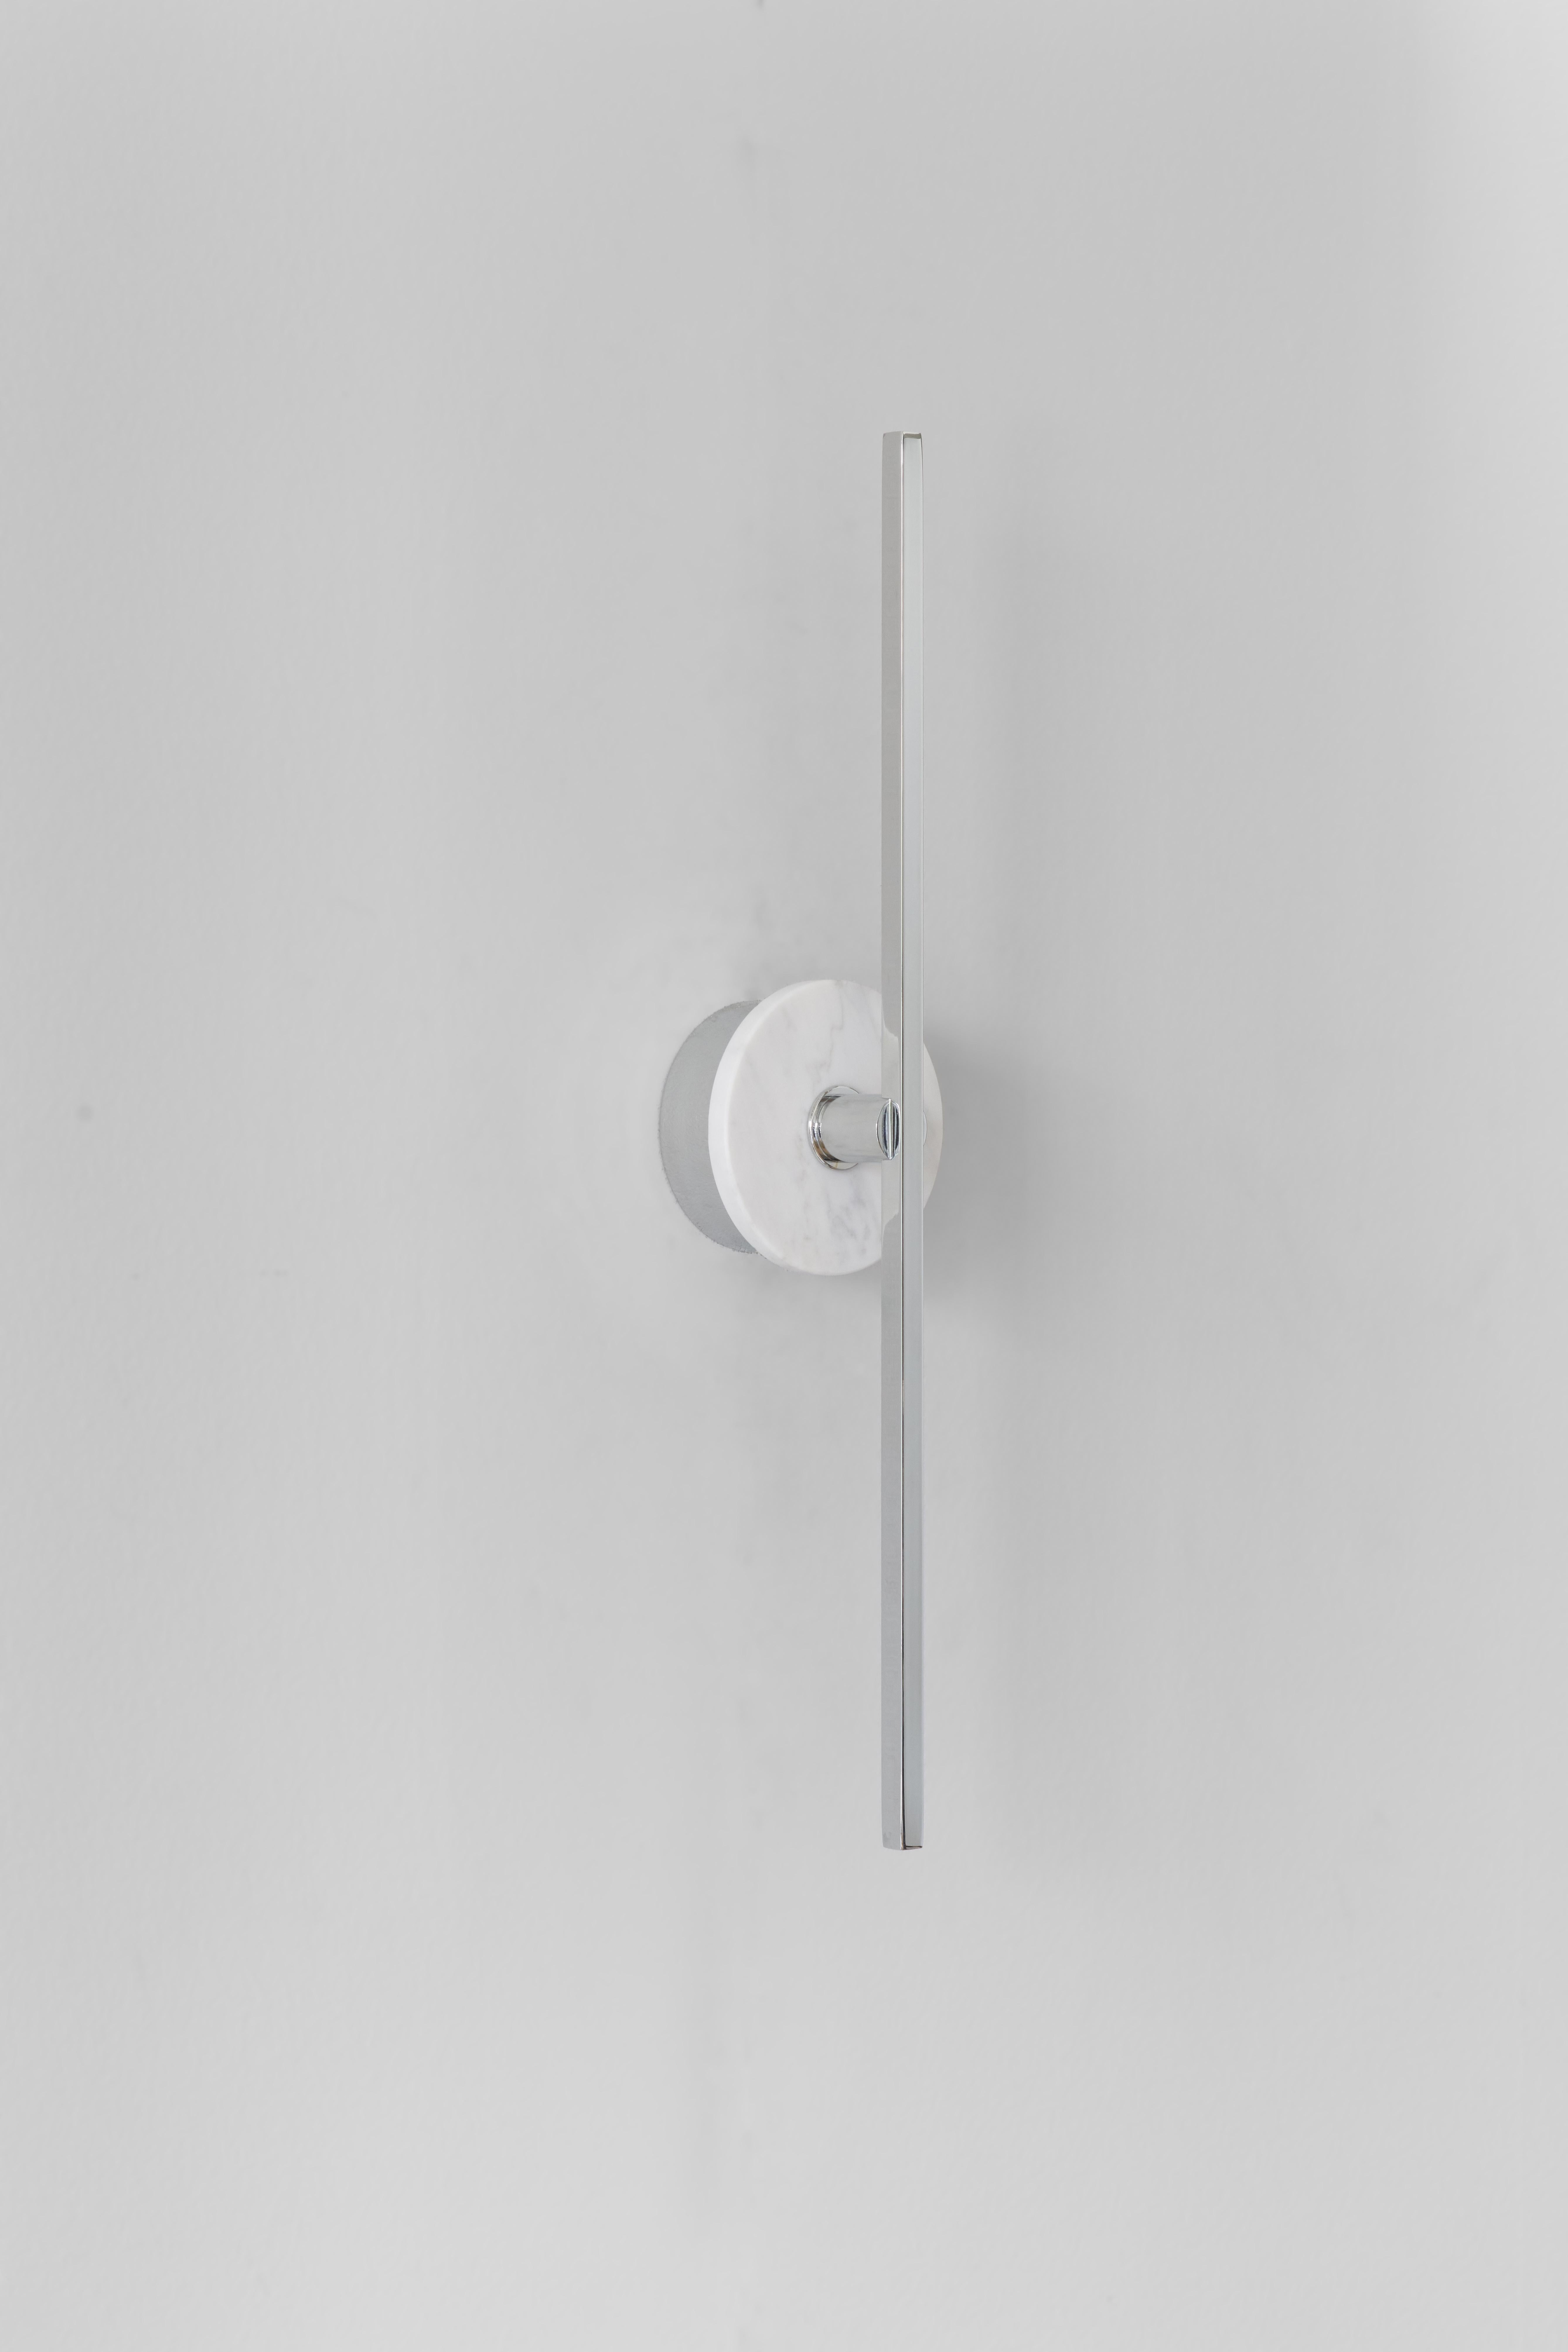 The stick wall sconce is a contemporary lighting fixture that features a Minimalist design with thin brass profiles and advanced LED technology. It emits a warm and diffused light that adds a cozy and inviting atmosphere to any room.

The white